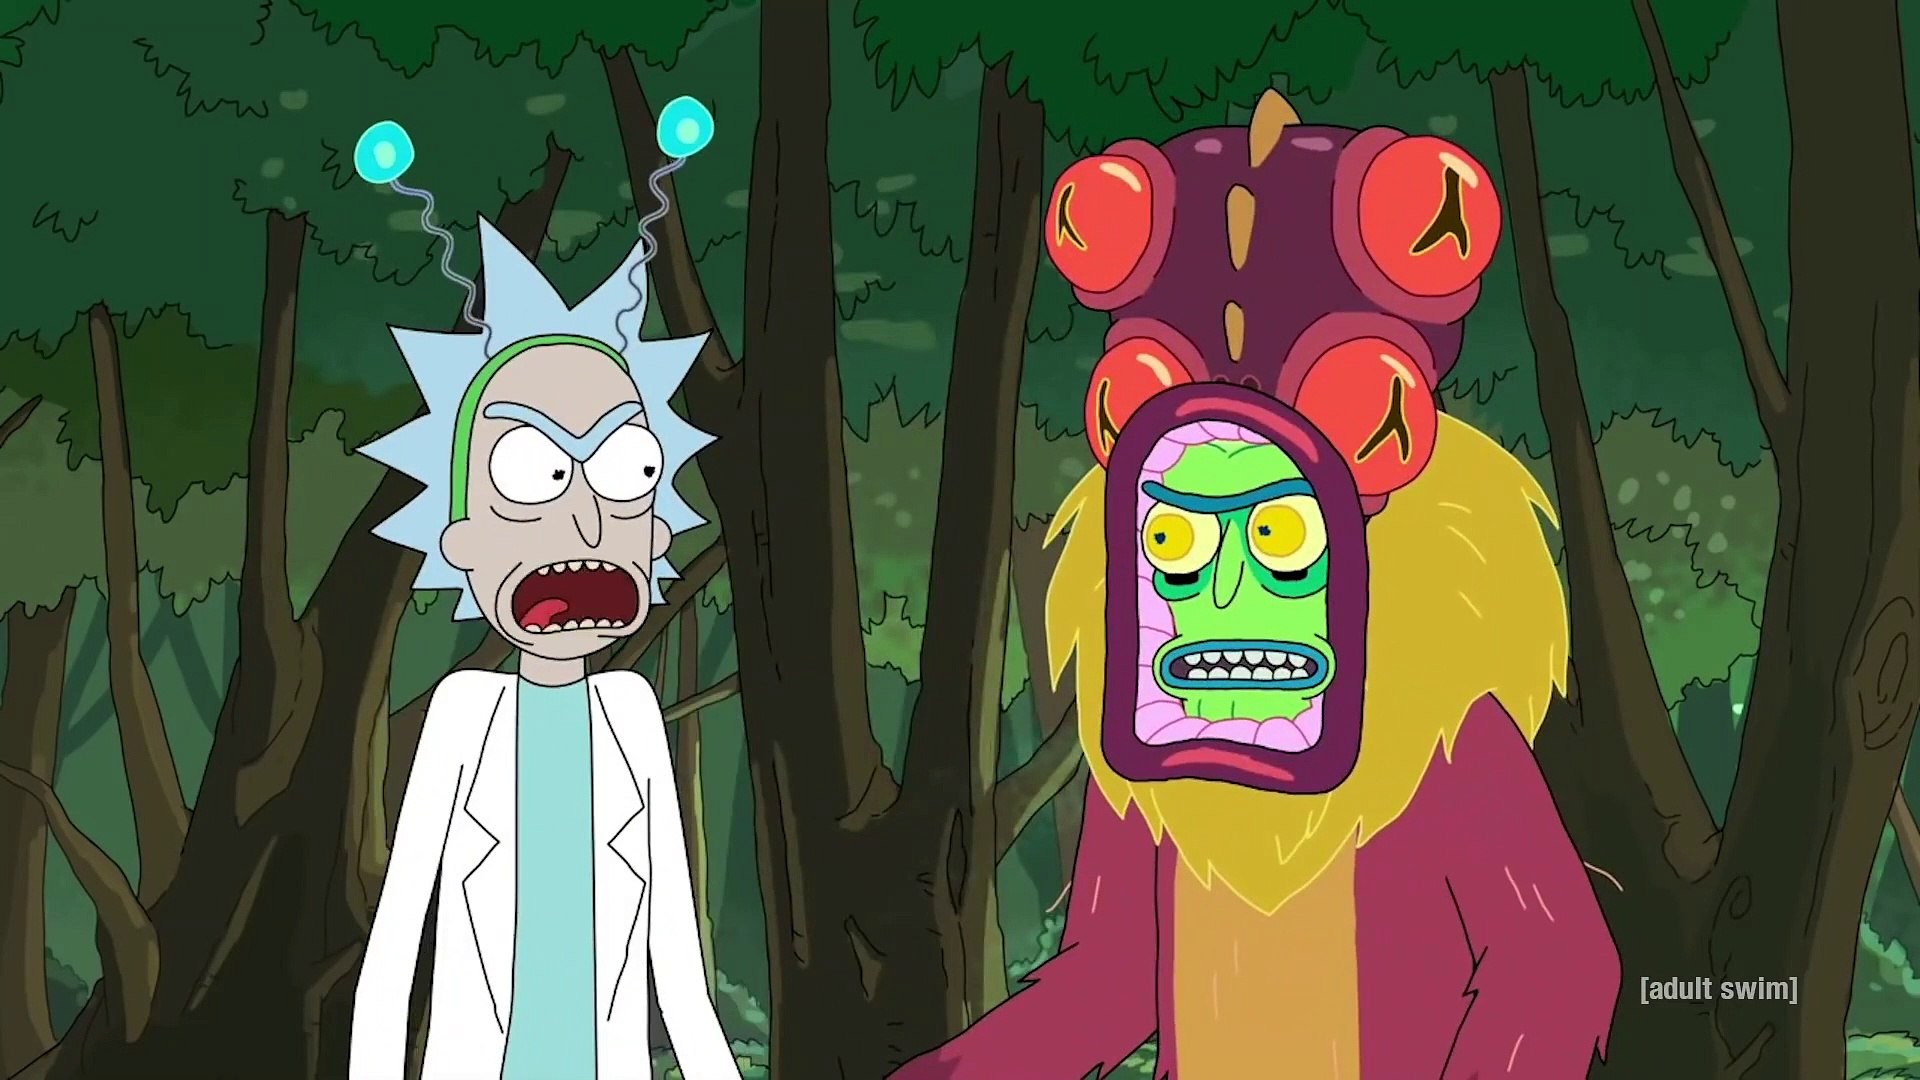 The latest Rick and Morty videos on Dailymotion